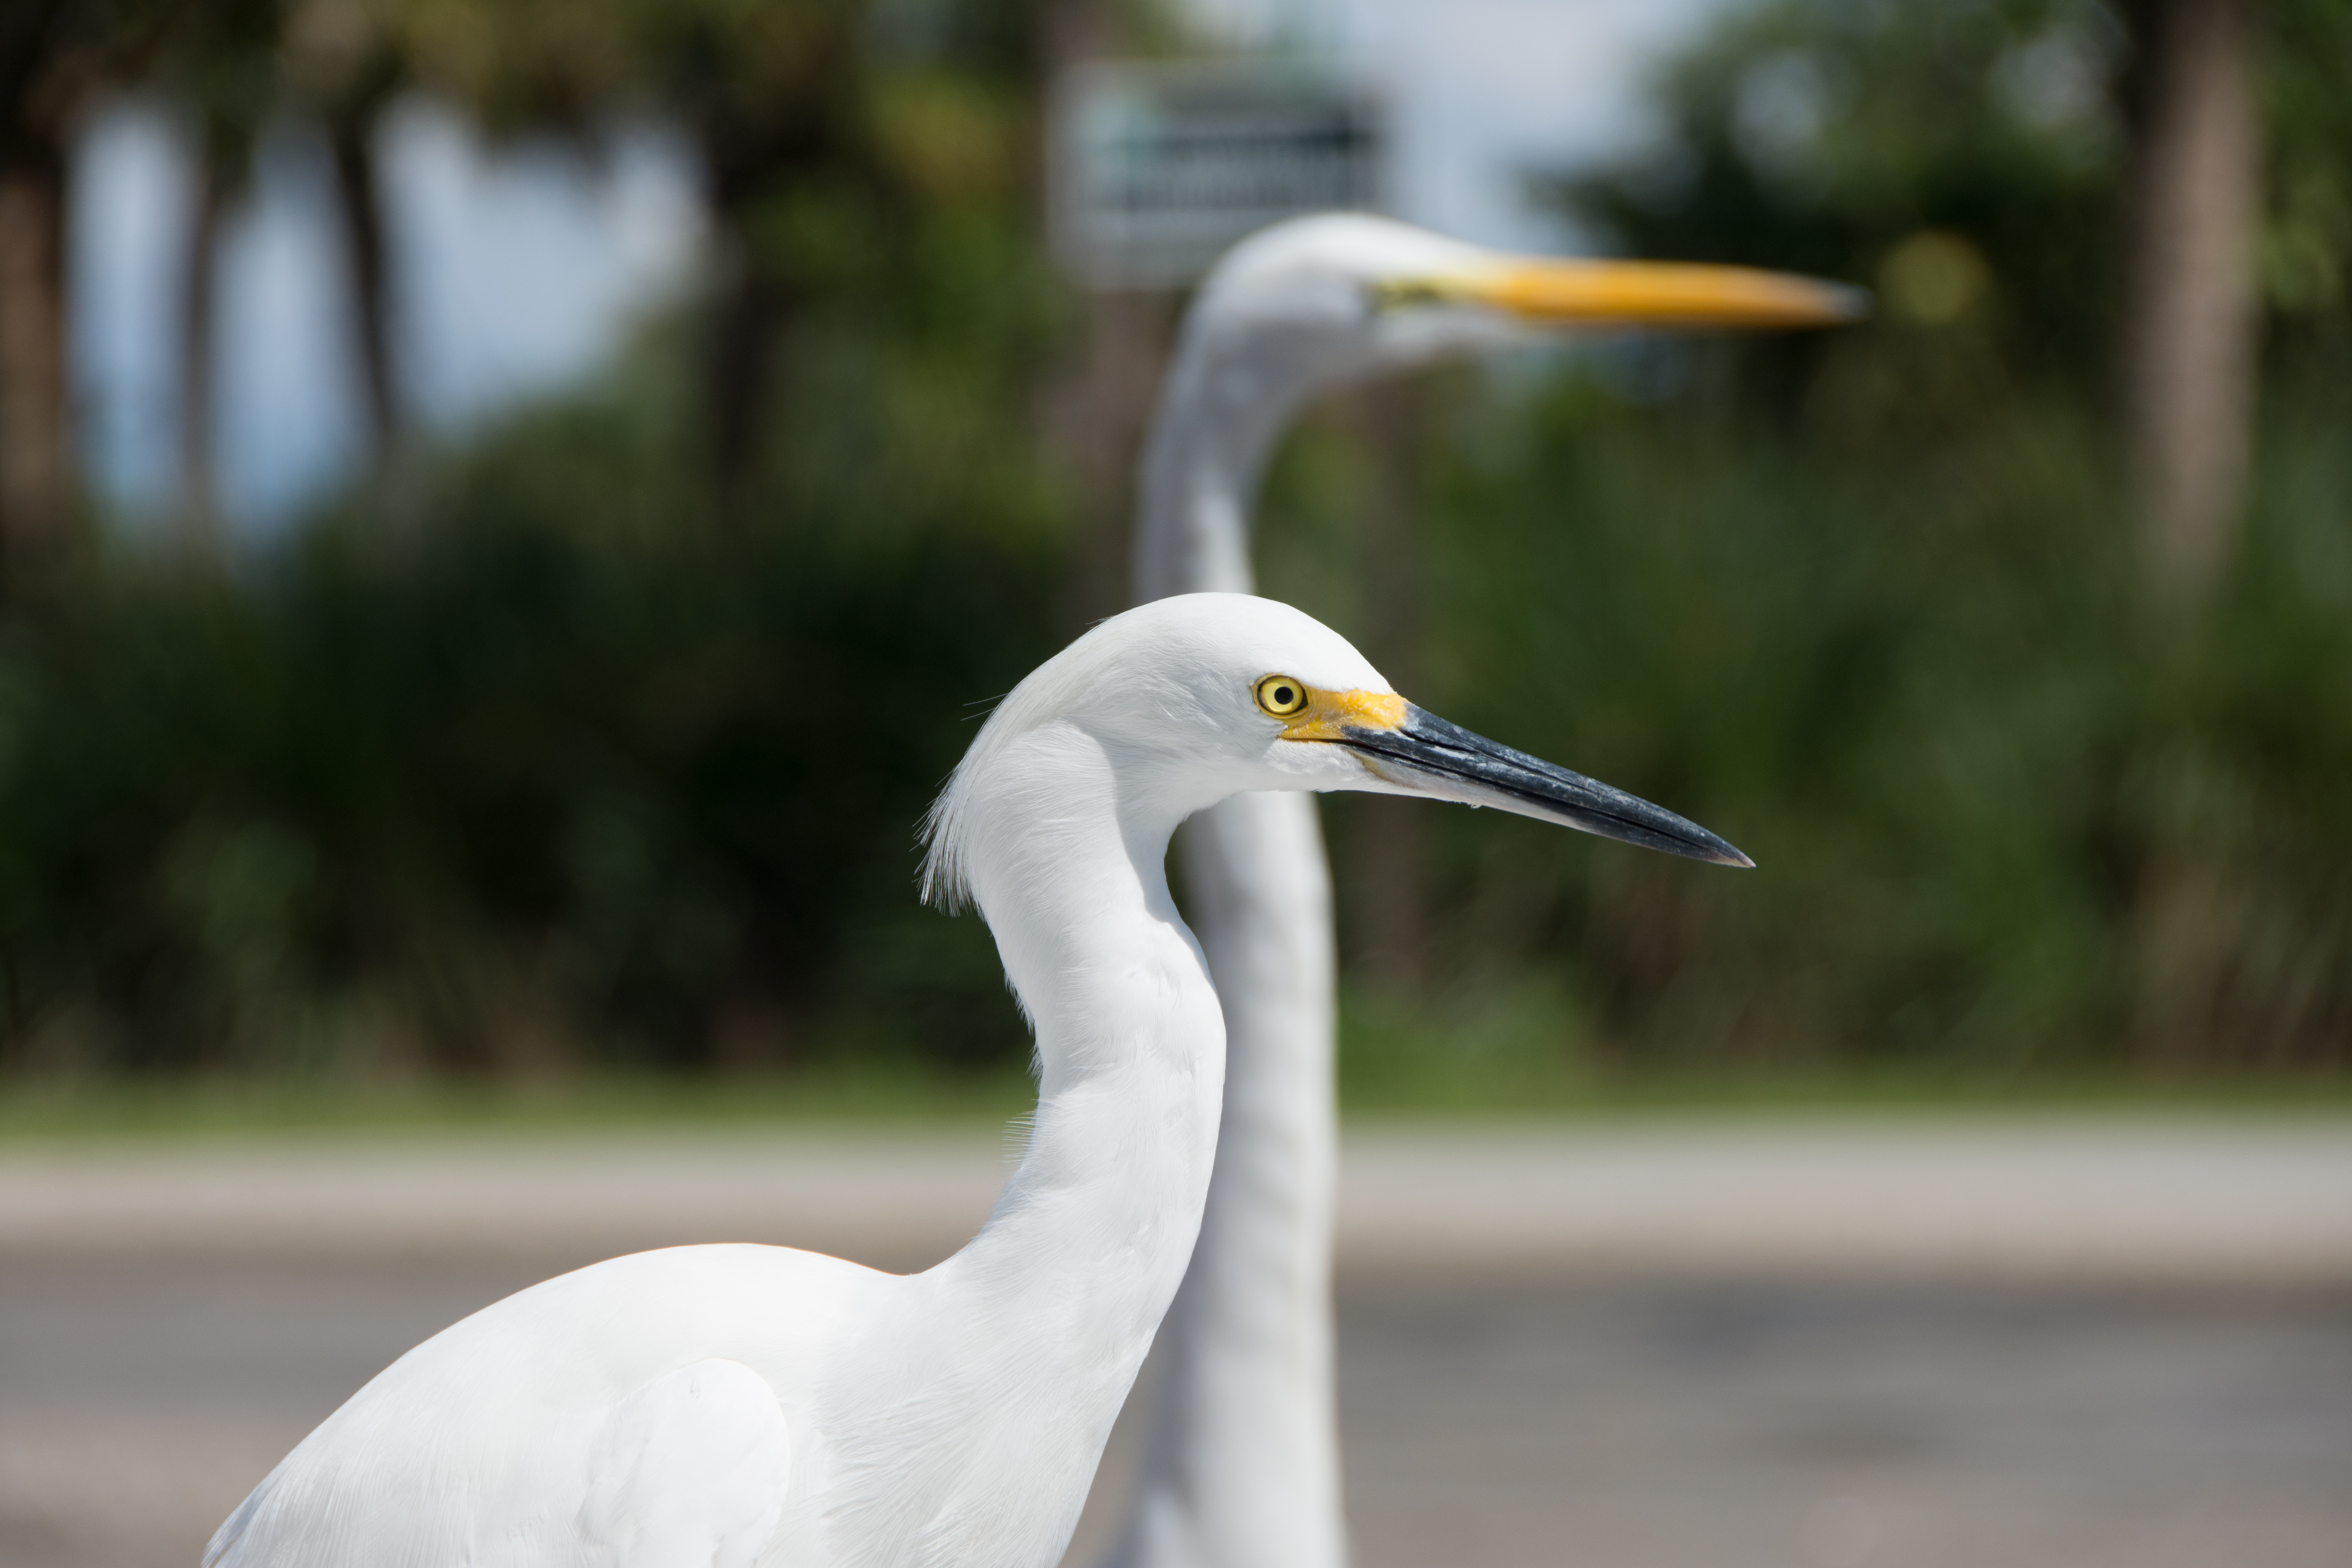 a egret in the foreground and great white heron blurred out in the background wait at the boat ramp for any left over snacks